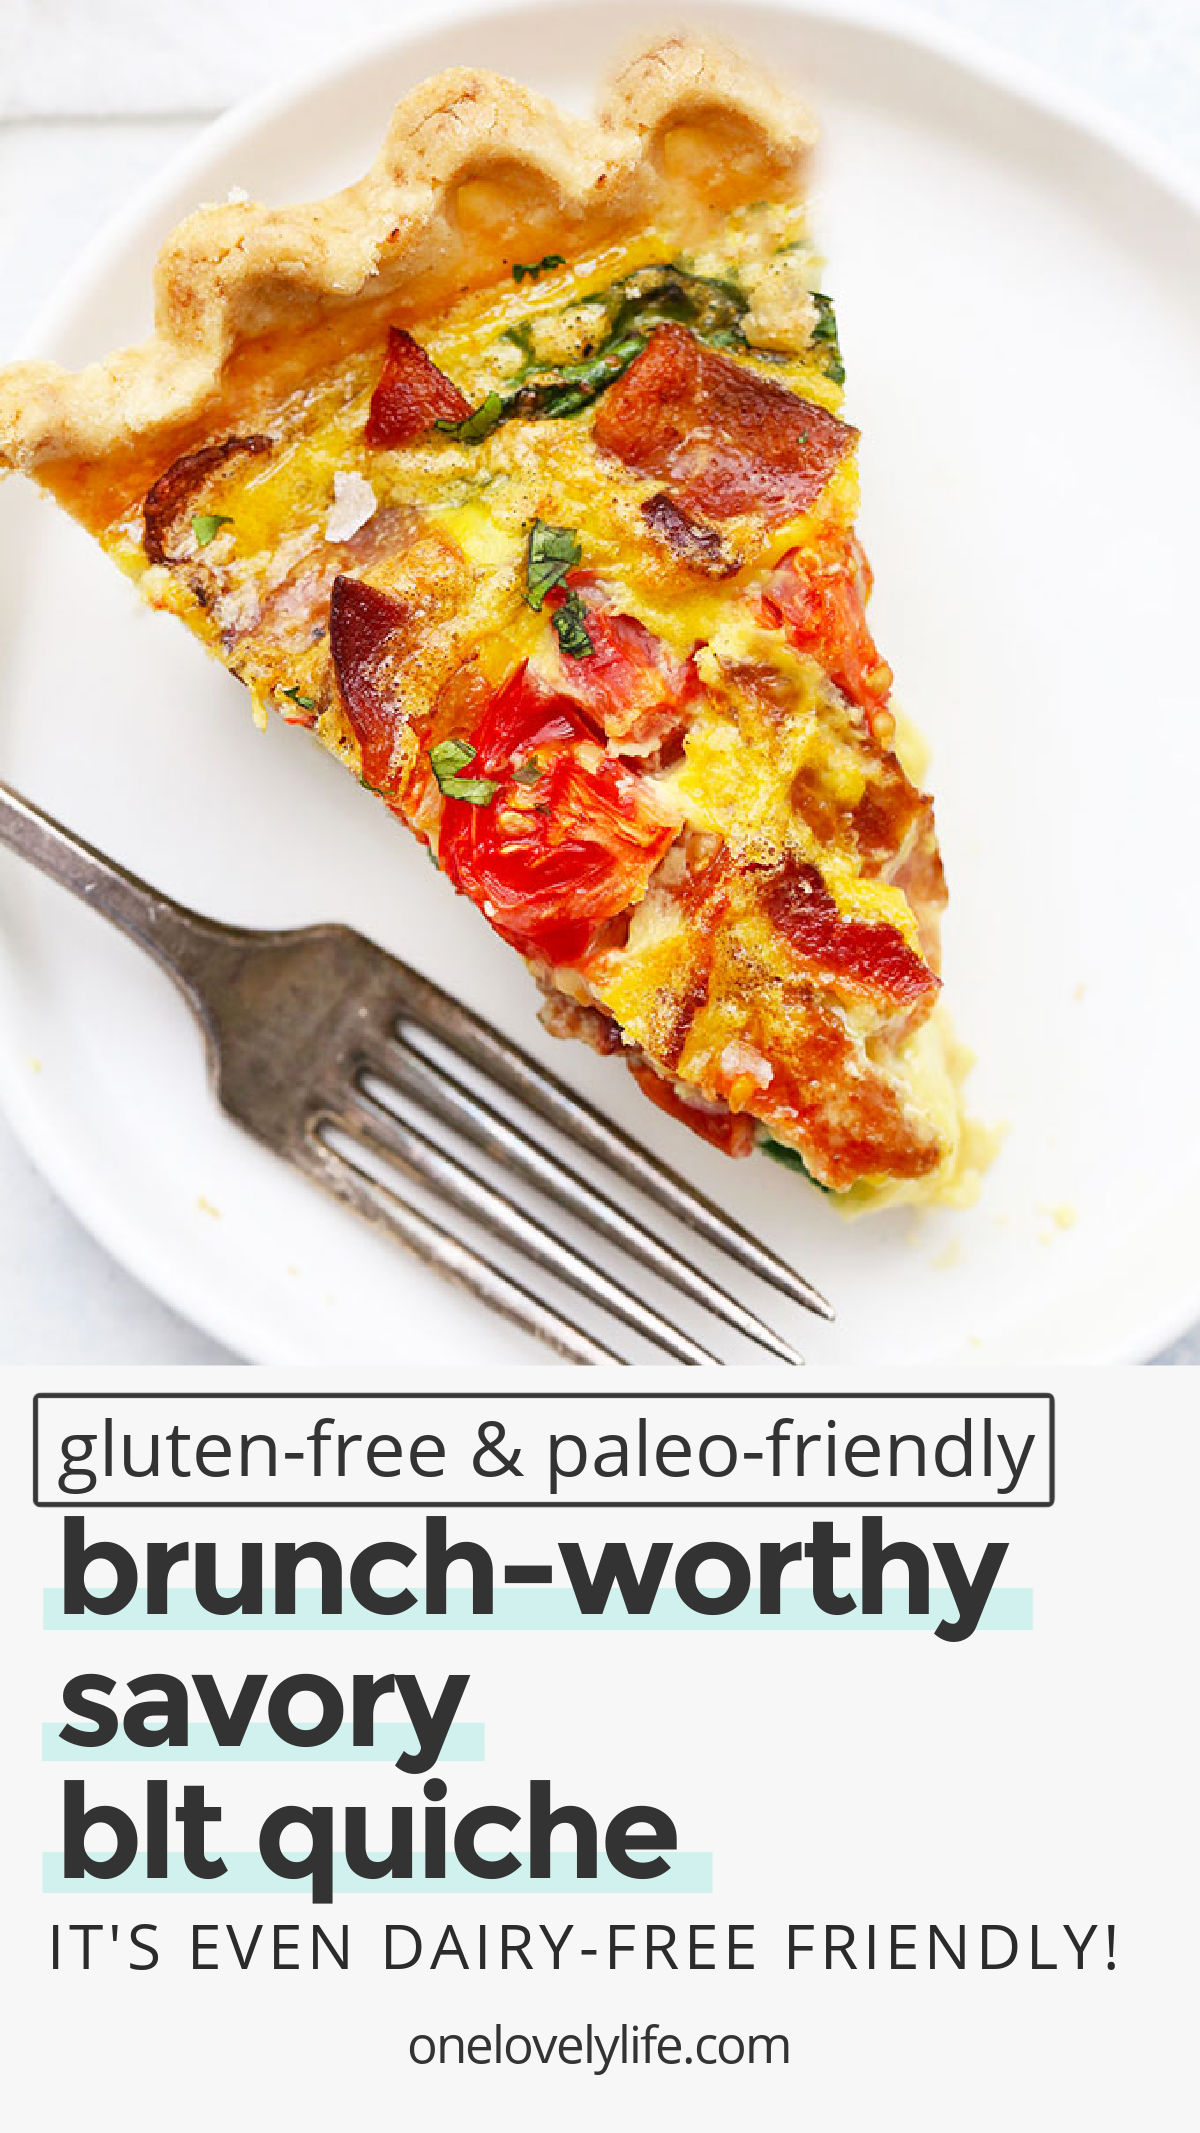 BLT Quiche - Classic BLT flavors with a breakfast twist! This quiche is loaded with bacon, greens, tomatoes, and more to take your breakfast or brunch to the next level! (Gluten Free & Paleo-Friendly) // Bacon quiche recipe // spinach quiche // tomato quiche recipe // paleo quiche // whole30 quiche // dairy free quiche // paleo quiche // gluten free quiche // paleo brunch // easter brunch // healthy brunch //